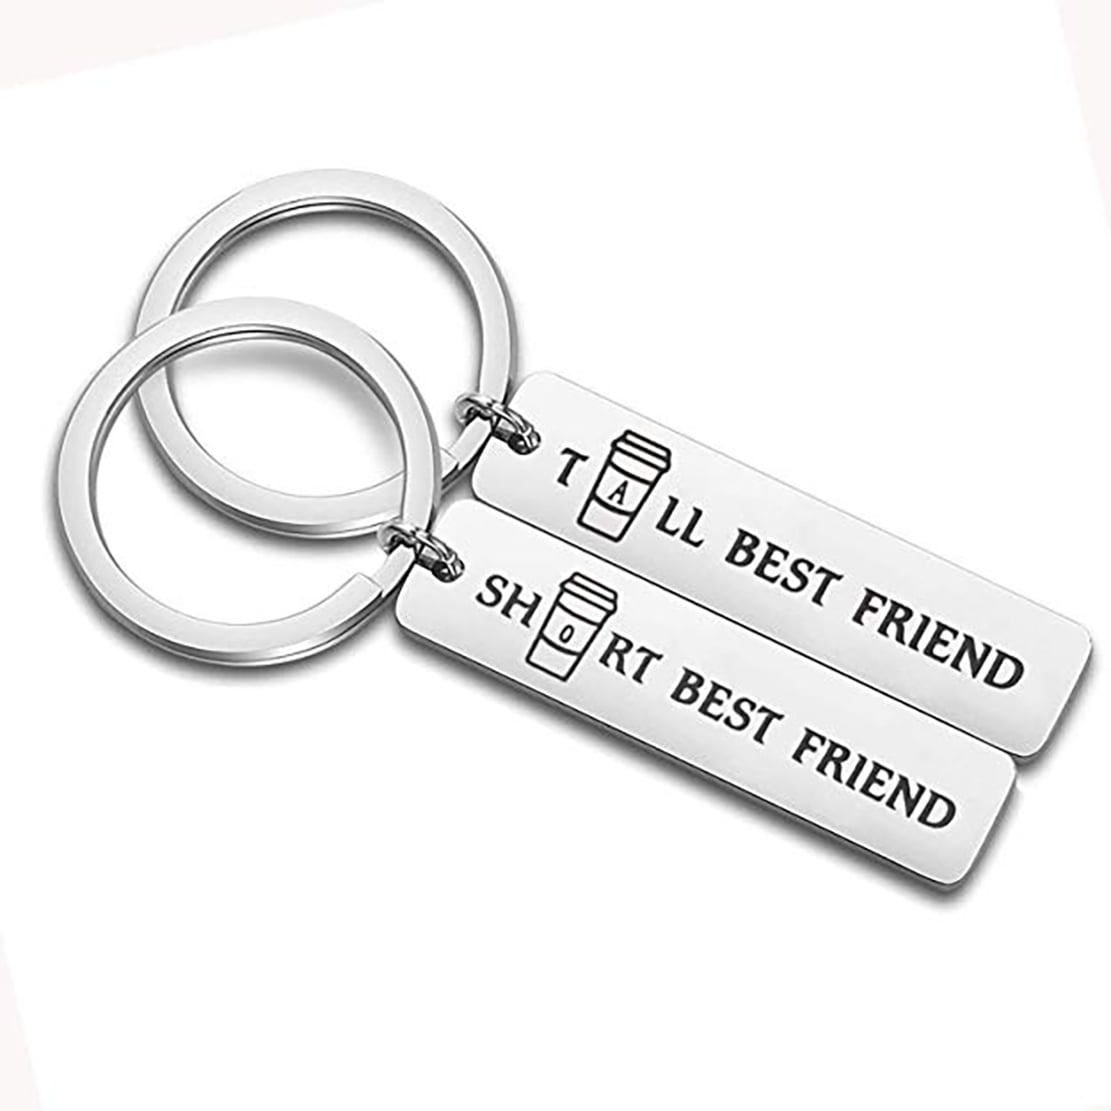 colorful gift Happy keychain Be kind gift best friends keychain I love you gift